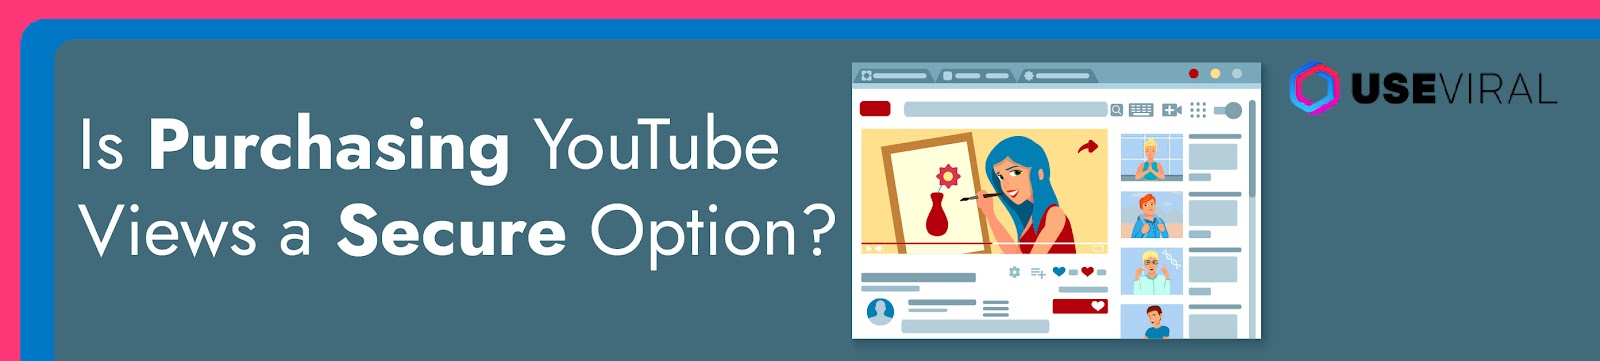 Is Purchasing YouTube Views a Secure Option?